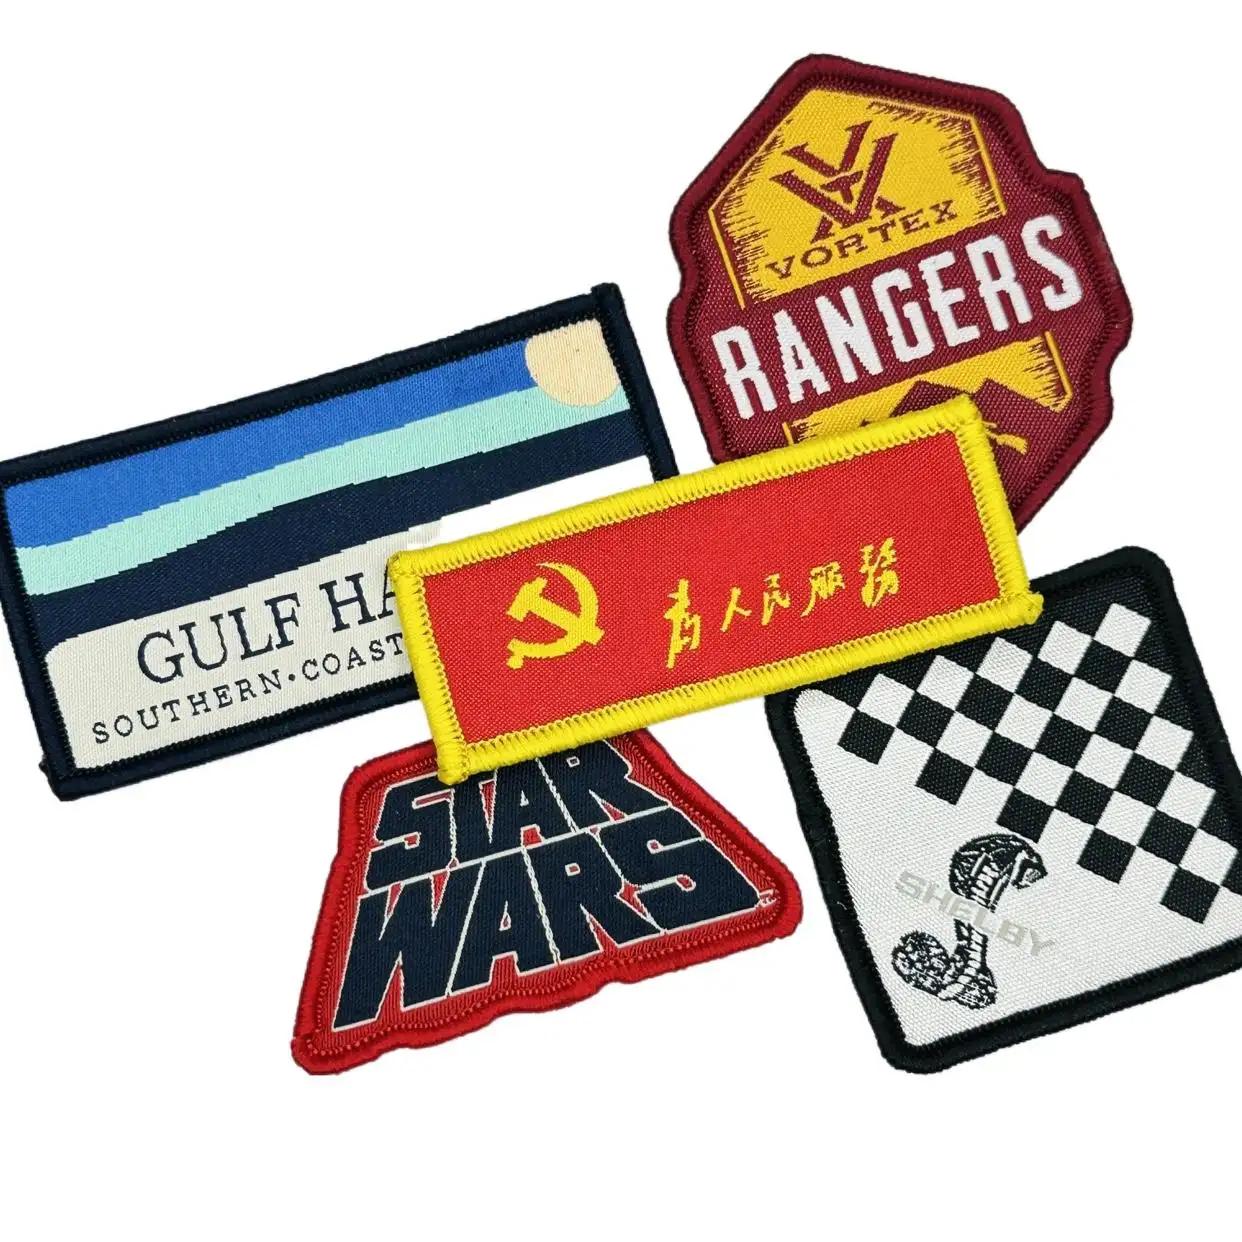 Custom Logo Sew On Garment Embroidered Clothing Patches Self Adhesive Applique Iron on Big 3d Cartoon Designer Embroidery Patch